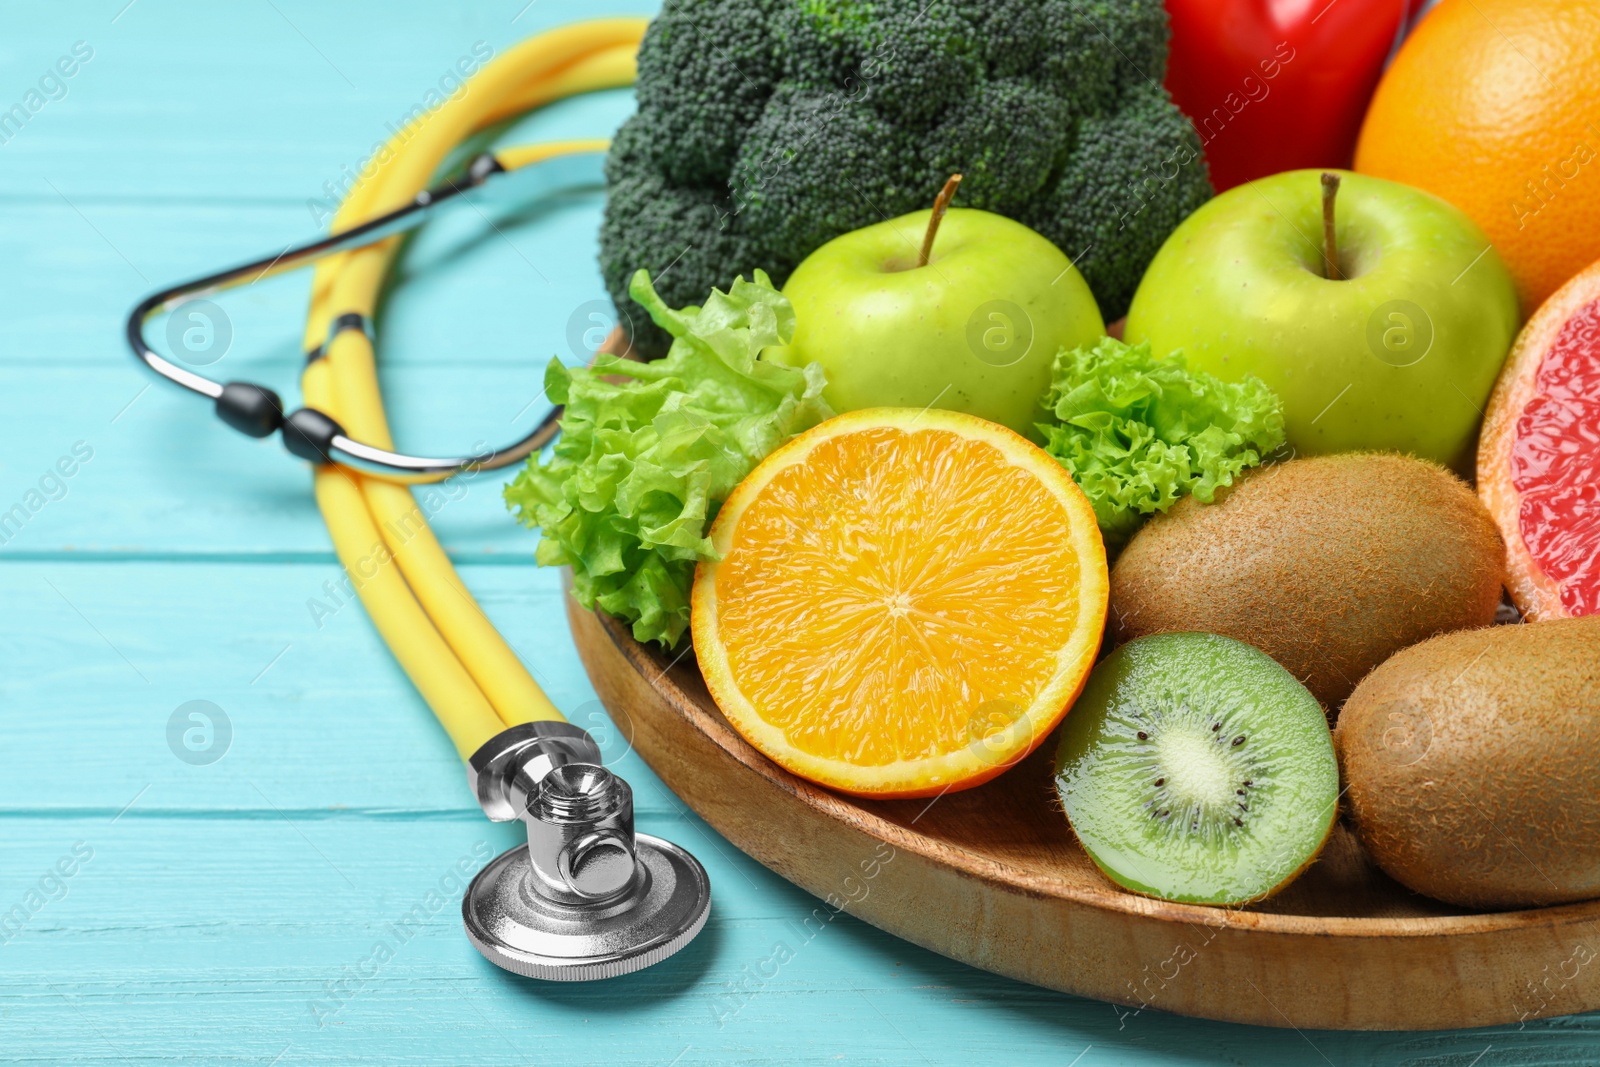 Photo of Fruits, vegetables and stethoscope on light blue wooden background, closeup. Visiting nutritionist